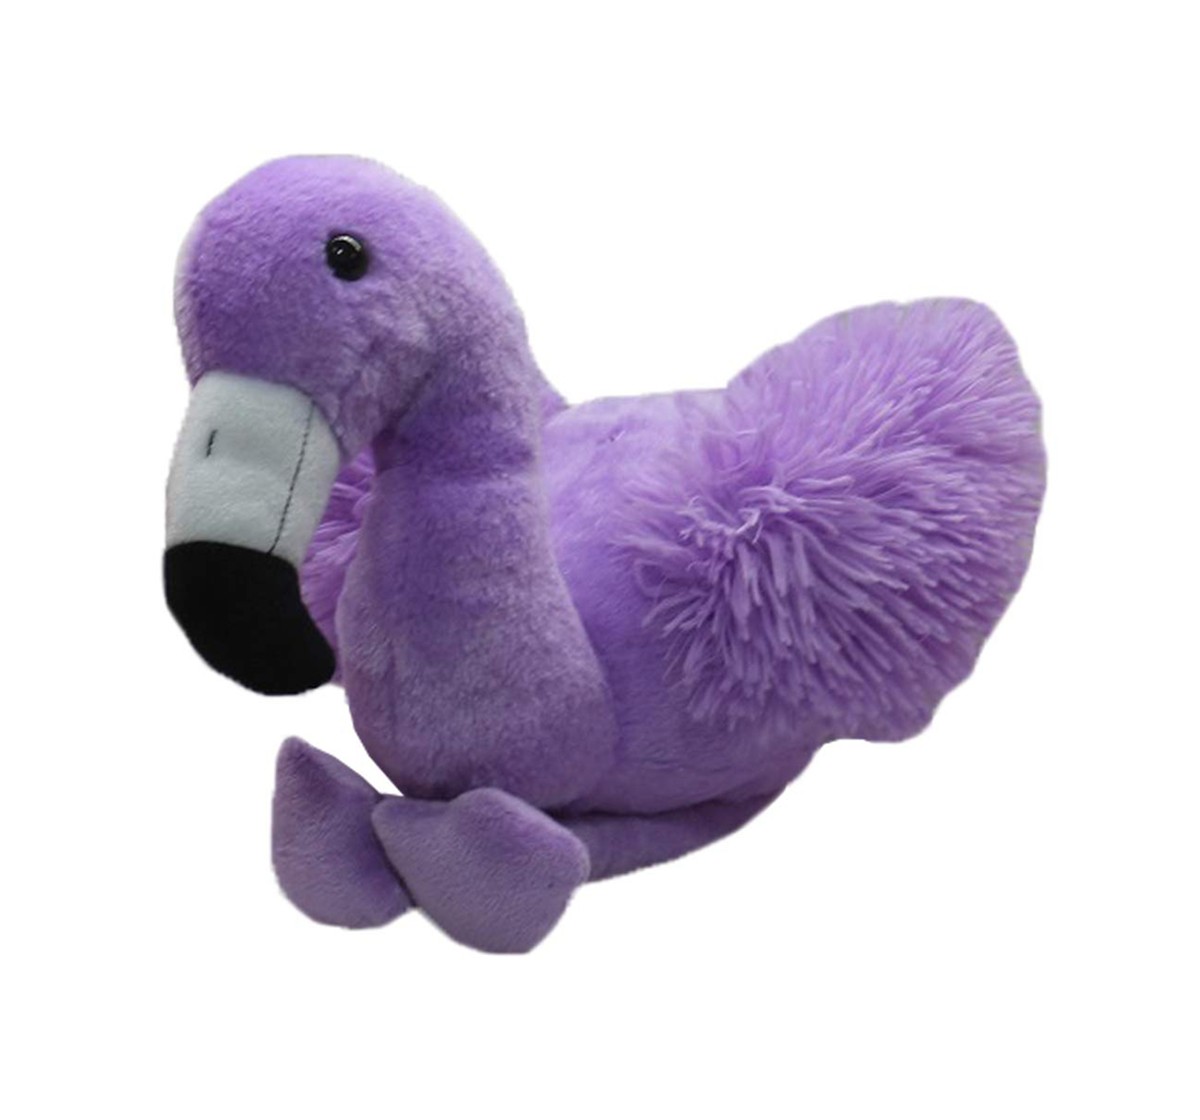  My Baby Excel Flamingo 32 Cm Quirky Soft Toy for Kids age 12M+ - 10 Cm (Purple)